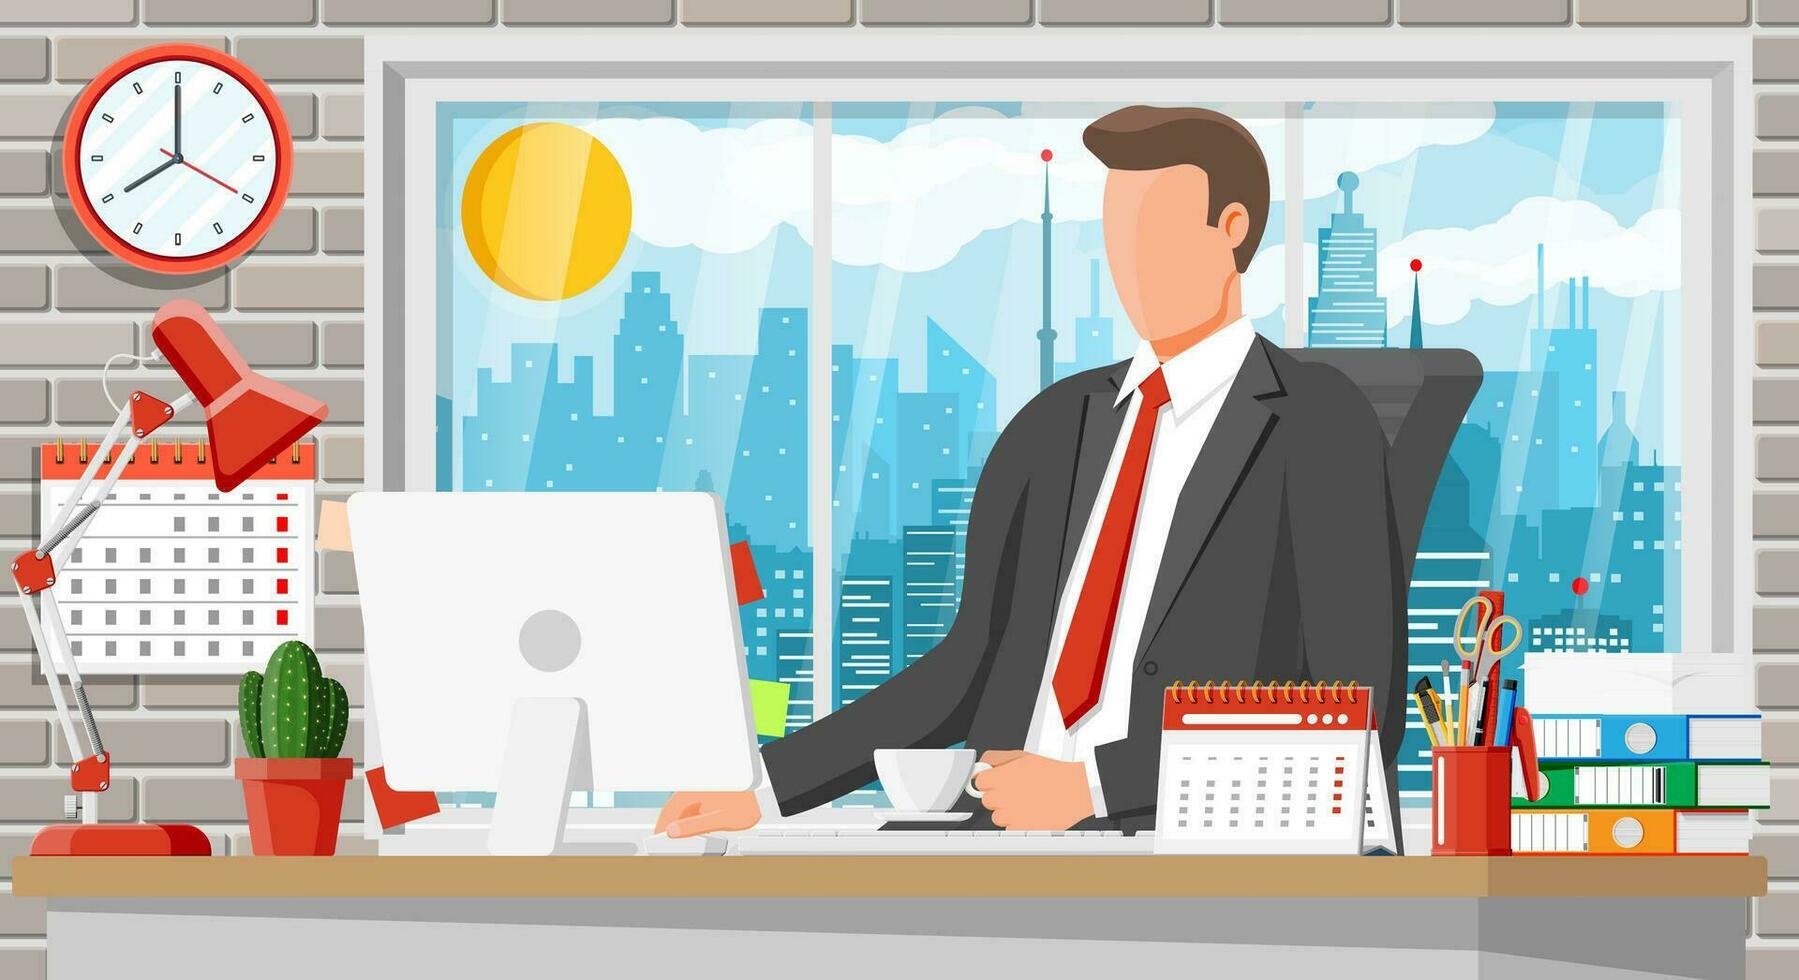 Office building interior. Businessman at desk with computer, chair, lamp, books and document papers. Window with cityscape. Modern business workplace. Cartoon flat vector illustration